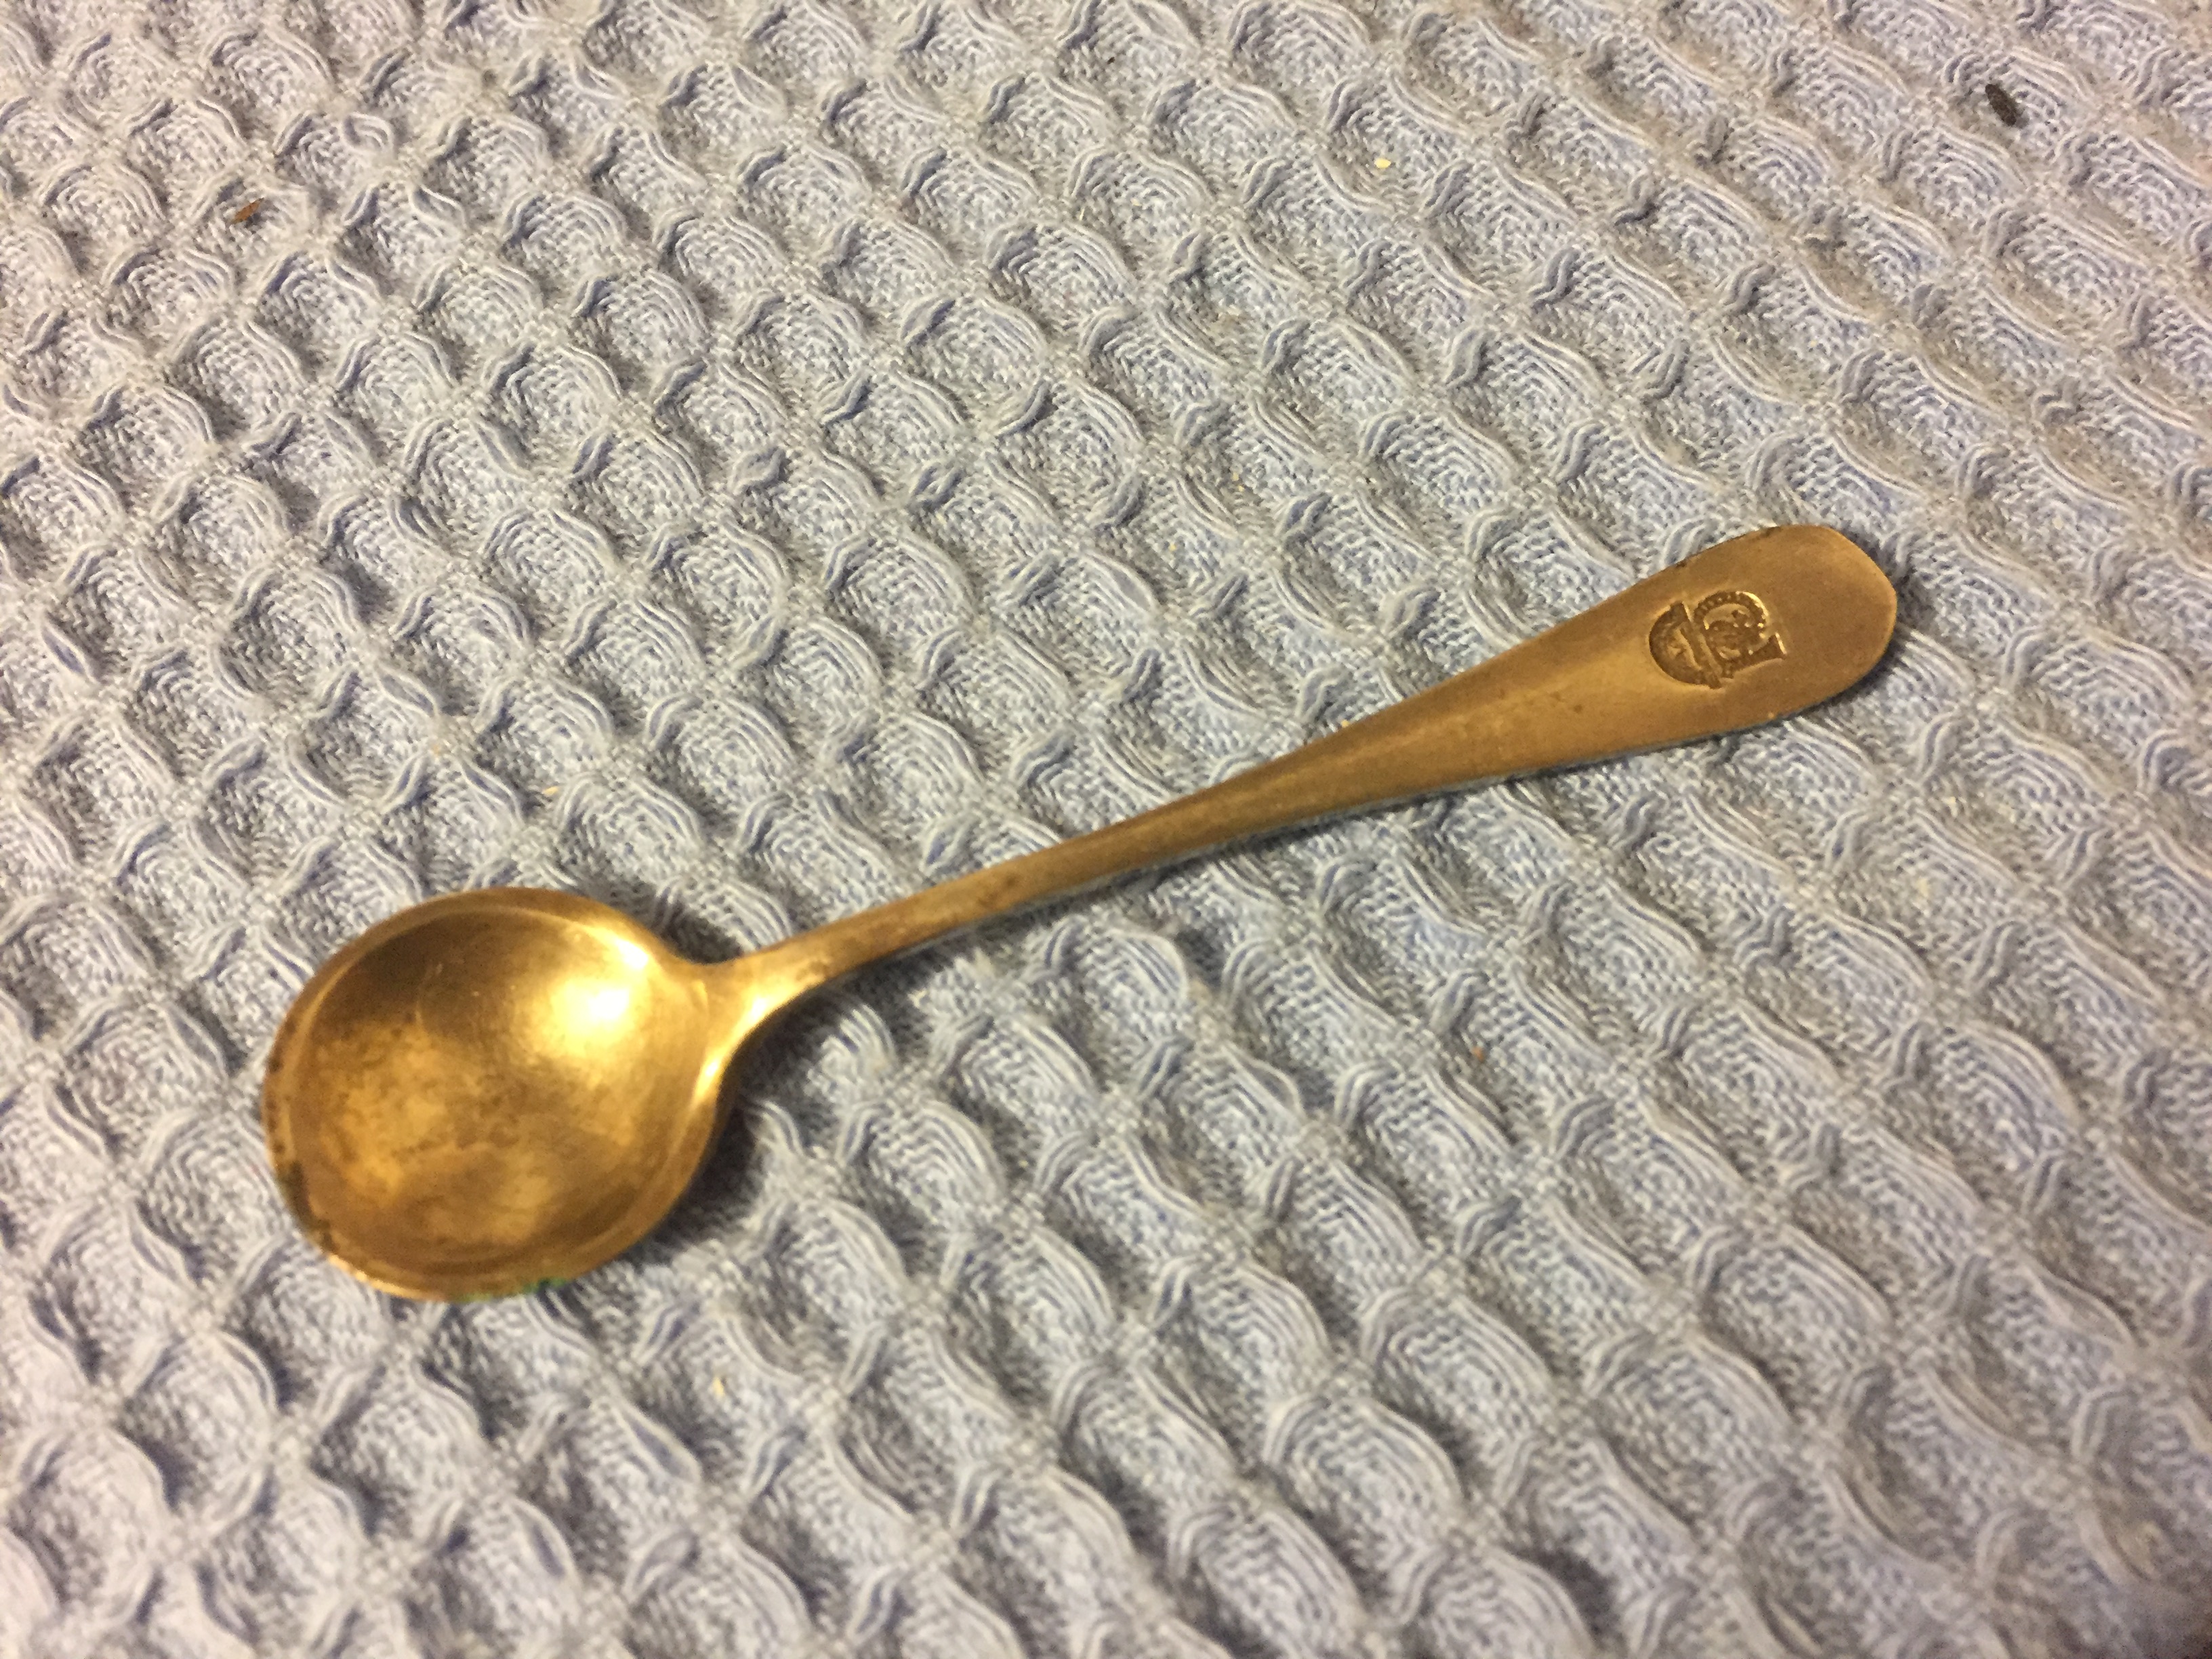 AS USED ON BOARD MUSTARD SPOON FROM THE P&O LINE